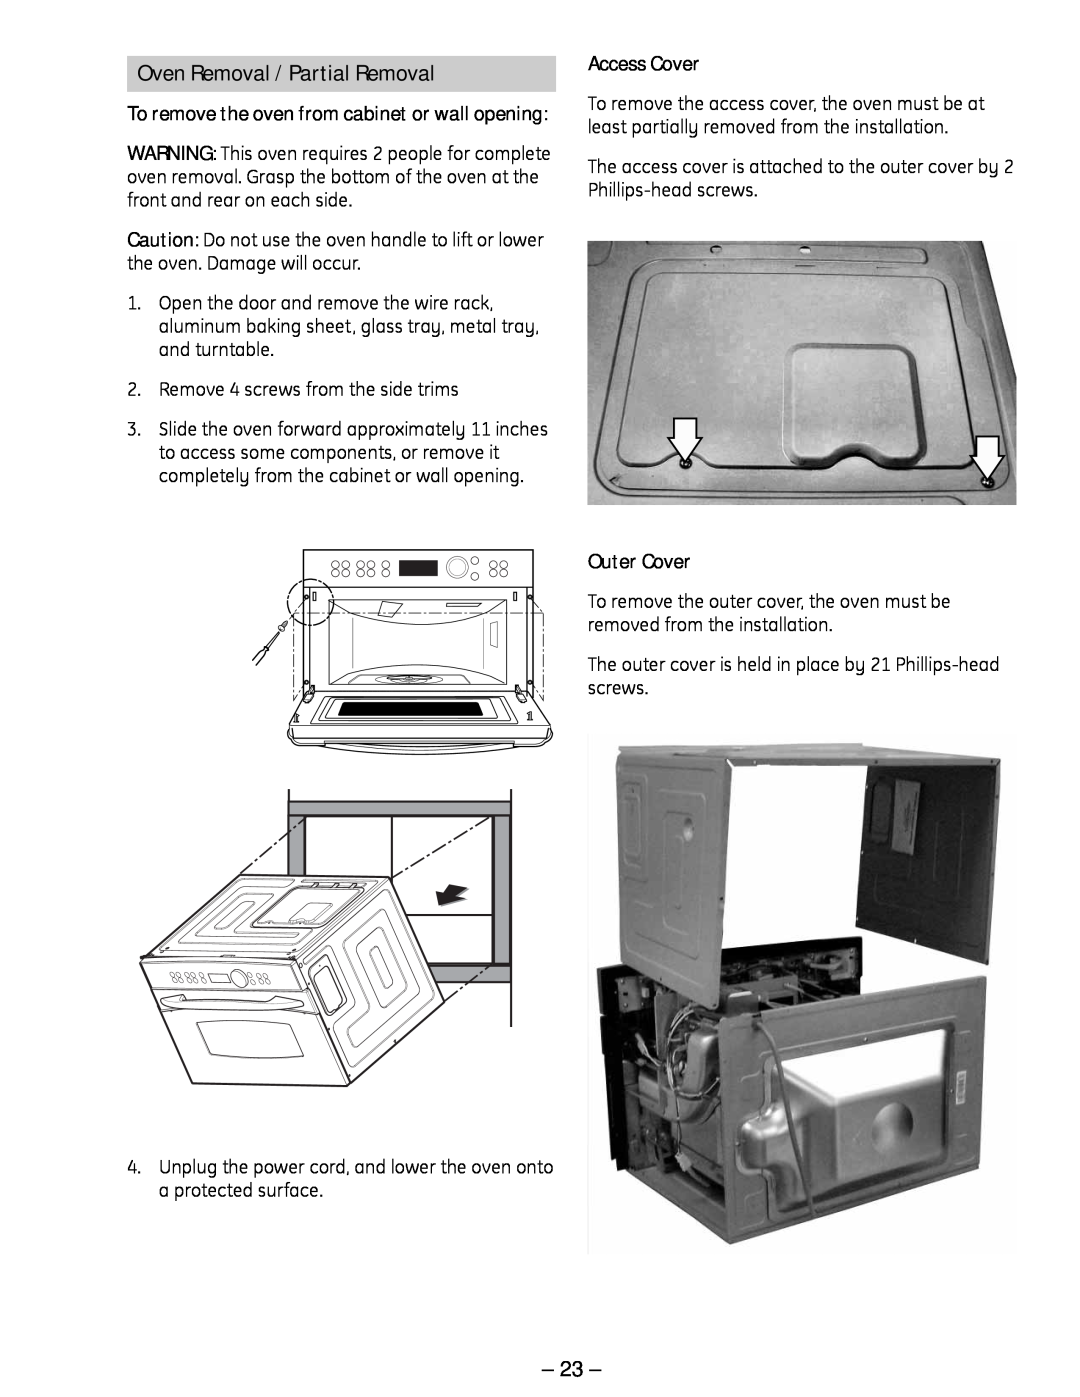 GE SCB 1000, ZSC 1001, ZSC 1000, SCB 1001 manual Oven Removal / Partial Removal, Access Cover, Outer Cover 